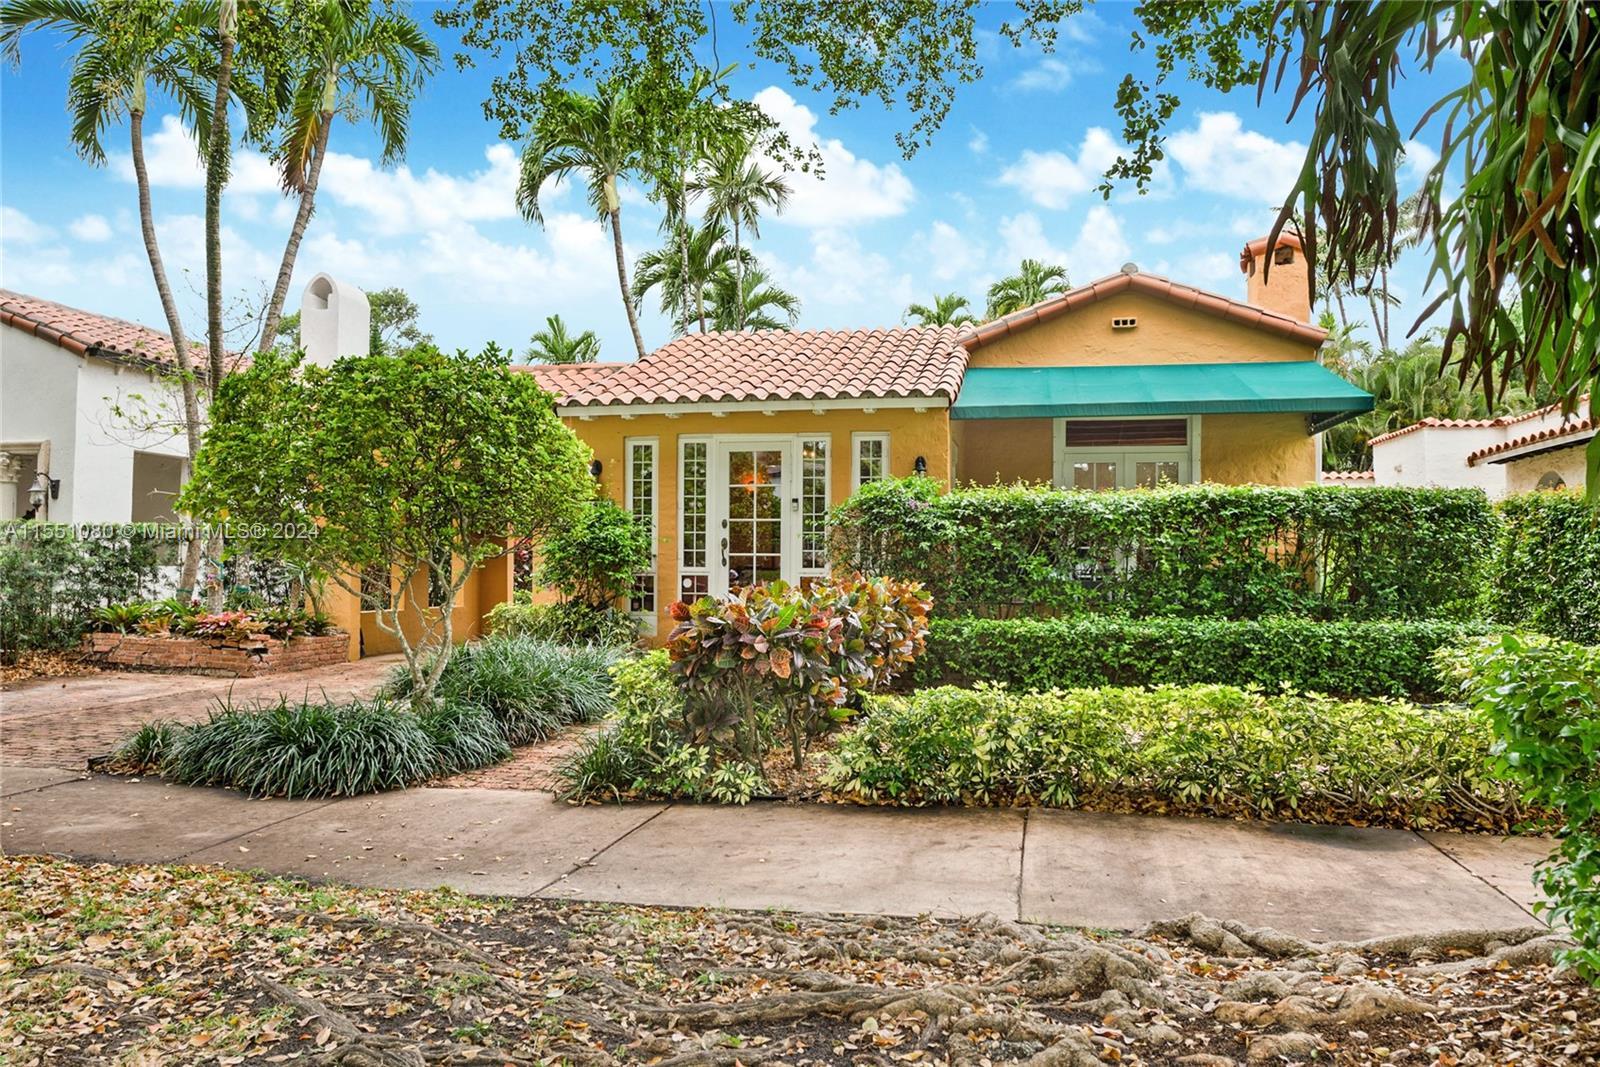 South Coral Gables, just off of S. Alhambra Cir. this old Spanish home epitomizes timeless charm. Lo